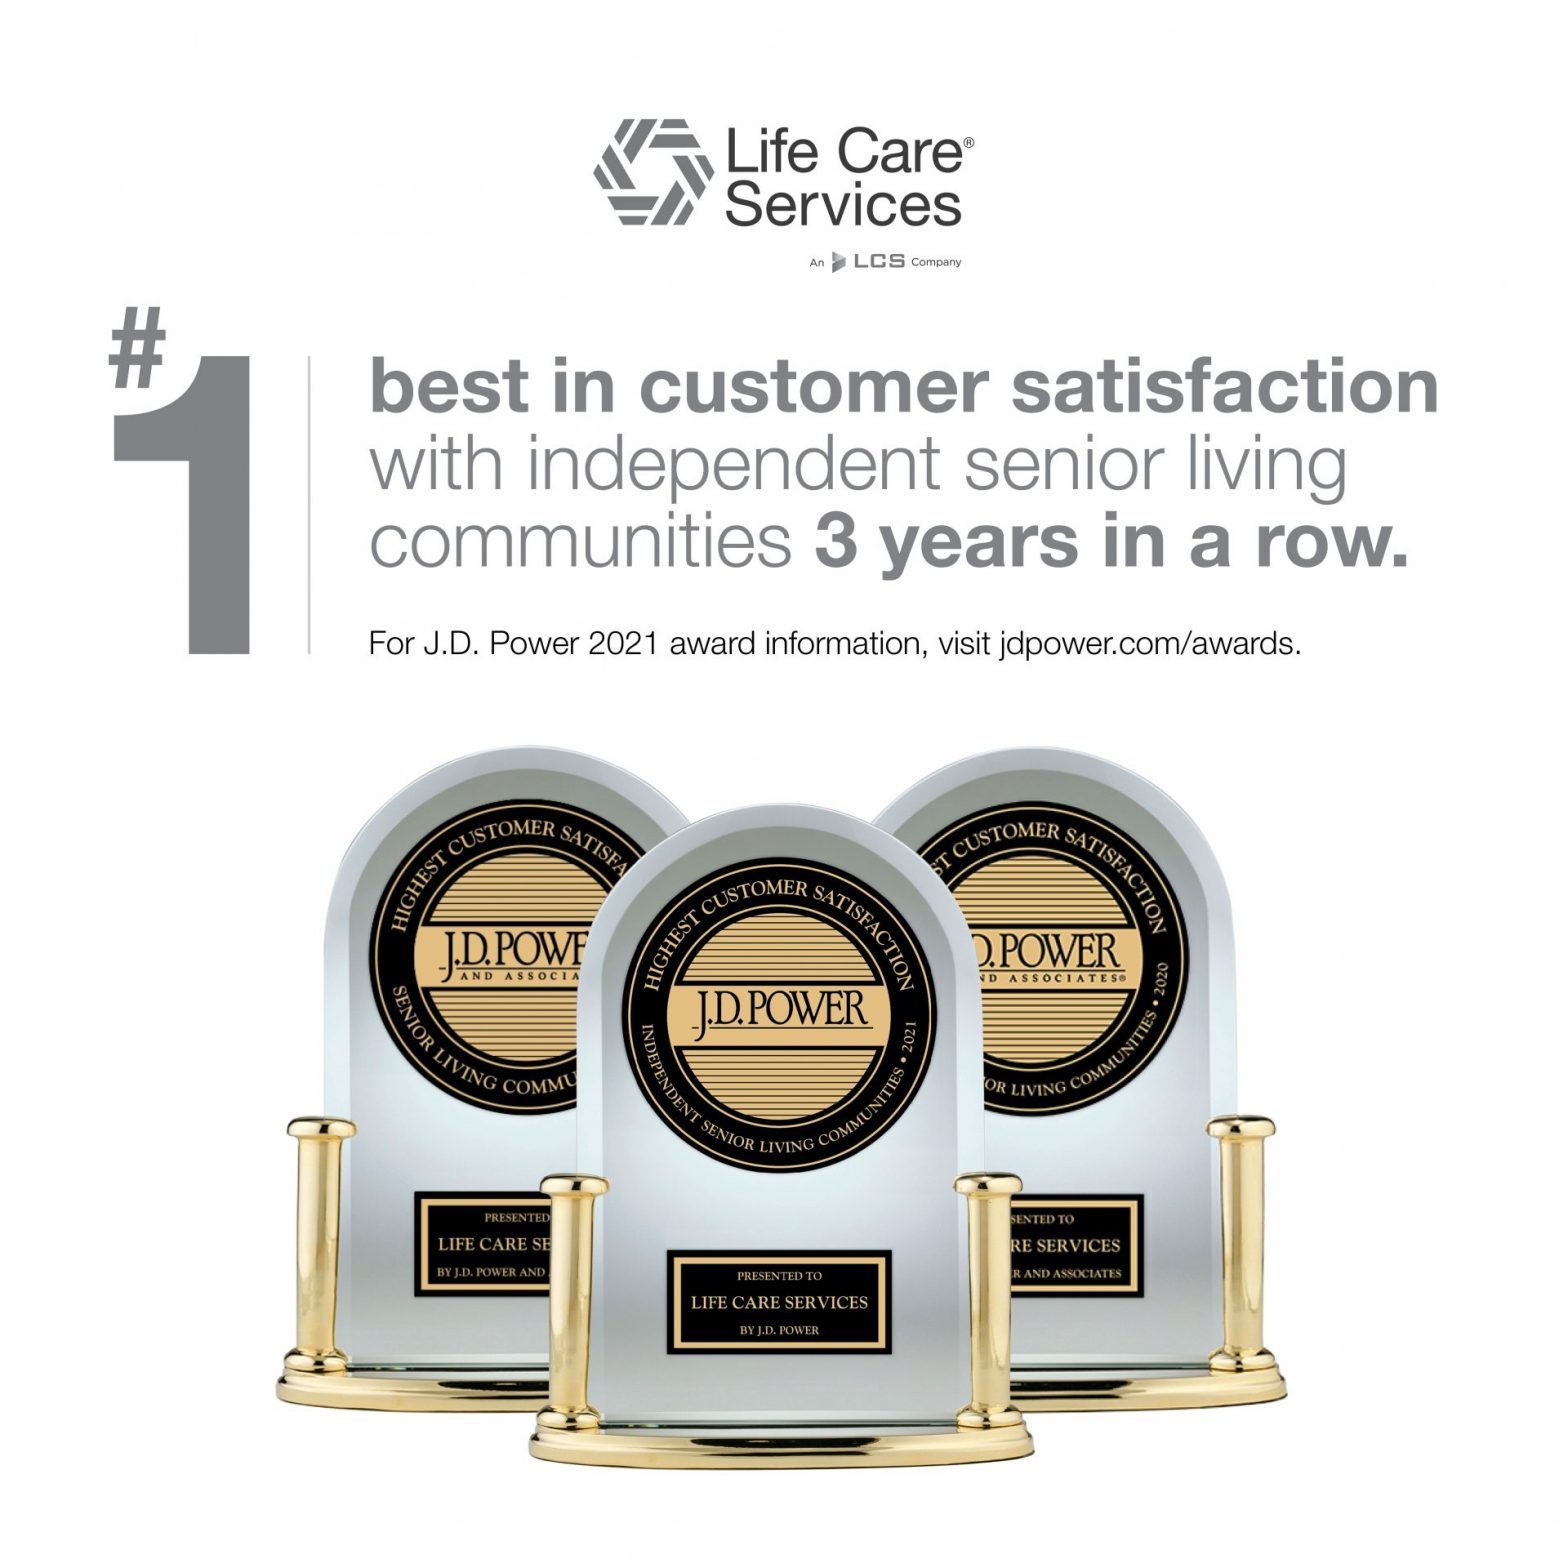 Life Care Services ranked #1 in customer satisfaction for independent senior living communities.